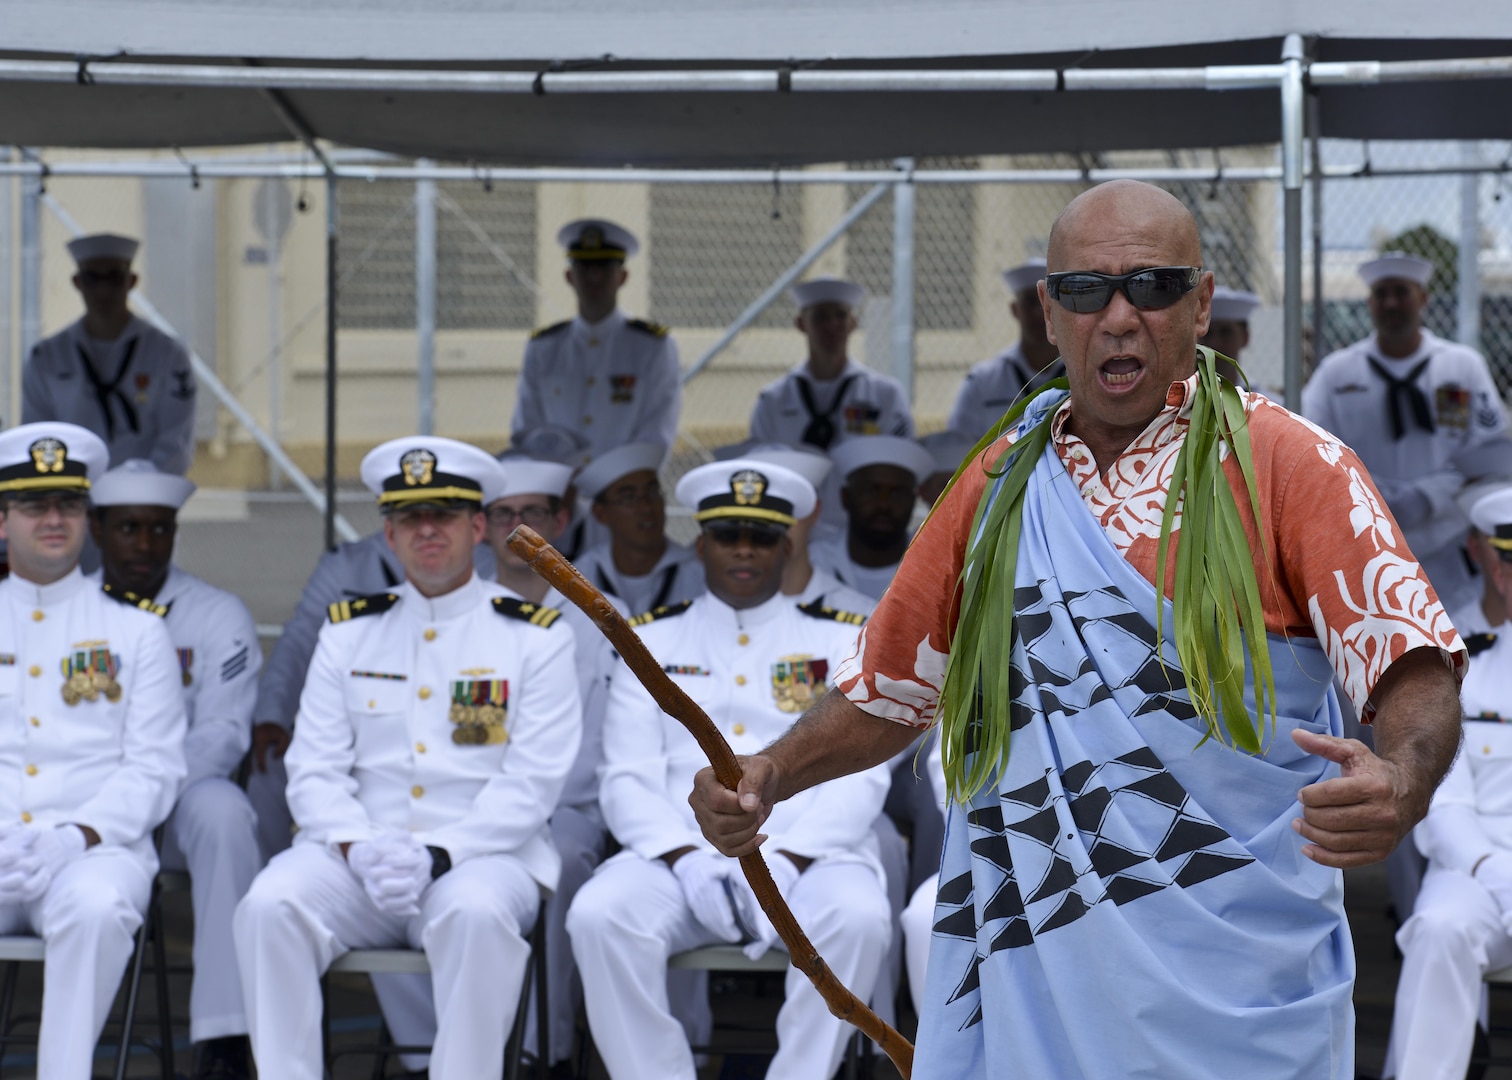 160530-N-LY160-489 JOINT BASE PEARL HARBOR-HICKAM, Hawaii (May 30, 2016) Tom Stone performs a Pula Aloha, a traditional Hawaiian blessing, during a Memorial Day decommissioning ceremony of the Los Angeles-class fast-attack submarine USS City of Corpus Christi (SSN 705) at Joint Base Pearl Harbor-Hickam. City of Corpus Christi concluded 33 years of service as the second U.S. warship to be named after Corpus Christi, Texas. (U.S. Navy photo by Mass Communication Specialist 2nd Class Michael H. Lee)